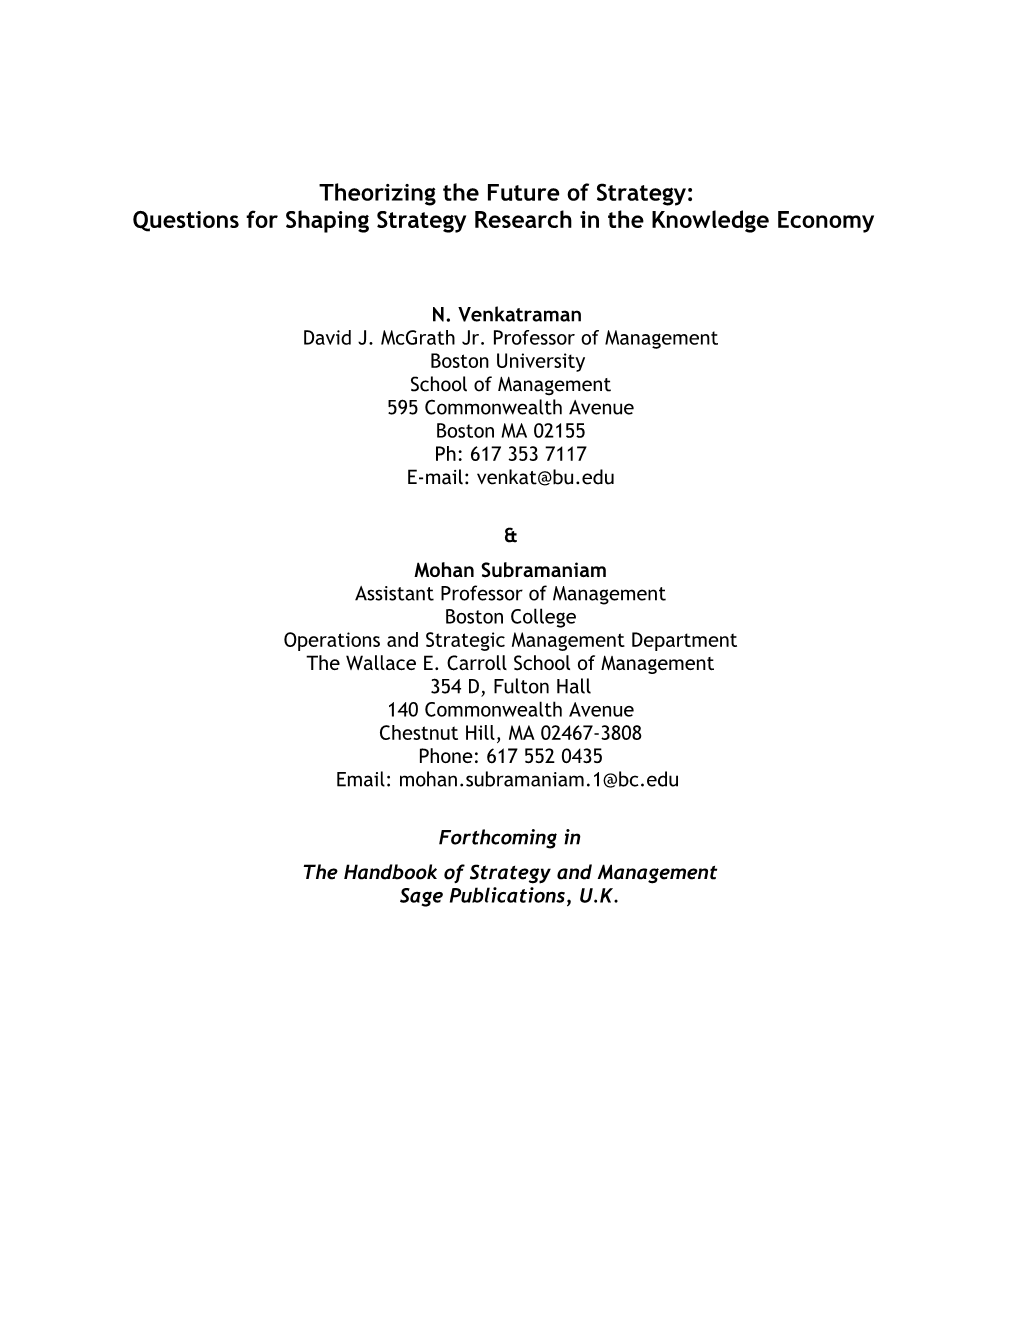 Theorizing the Future of Strategy: Five Questions for Shaping Strategy in the Knowledge Economy